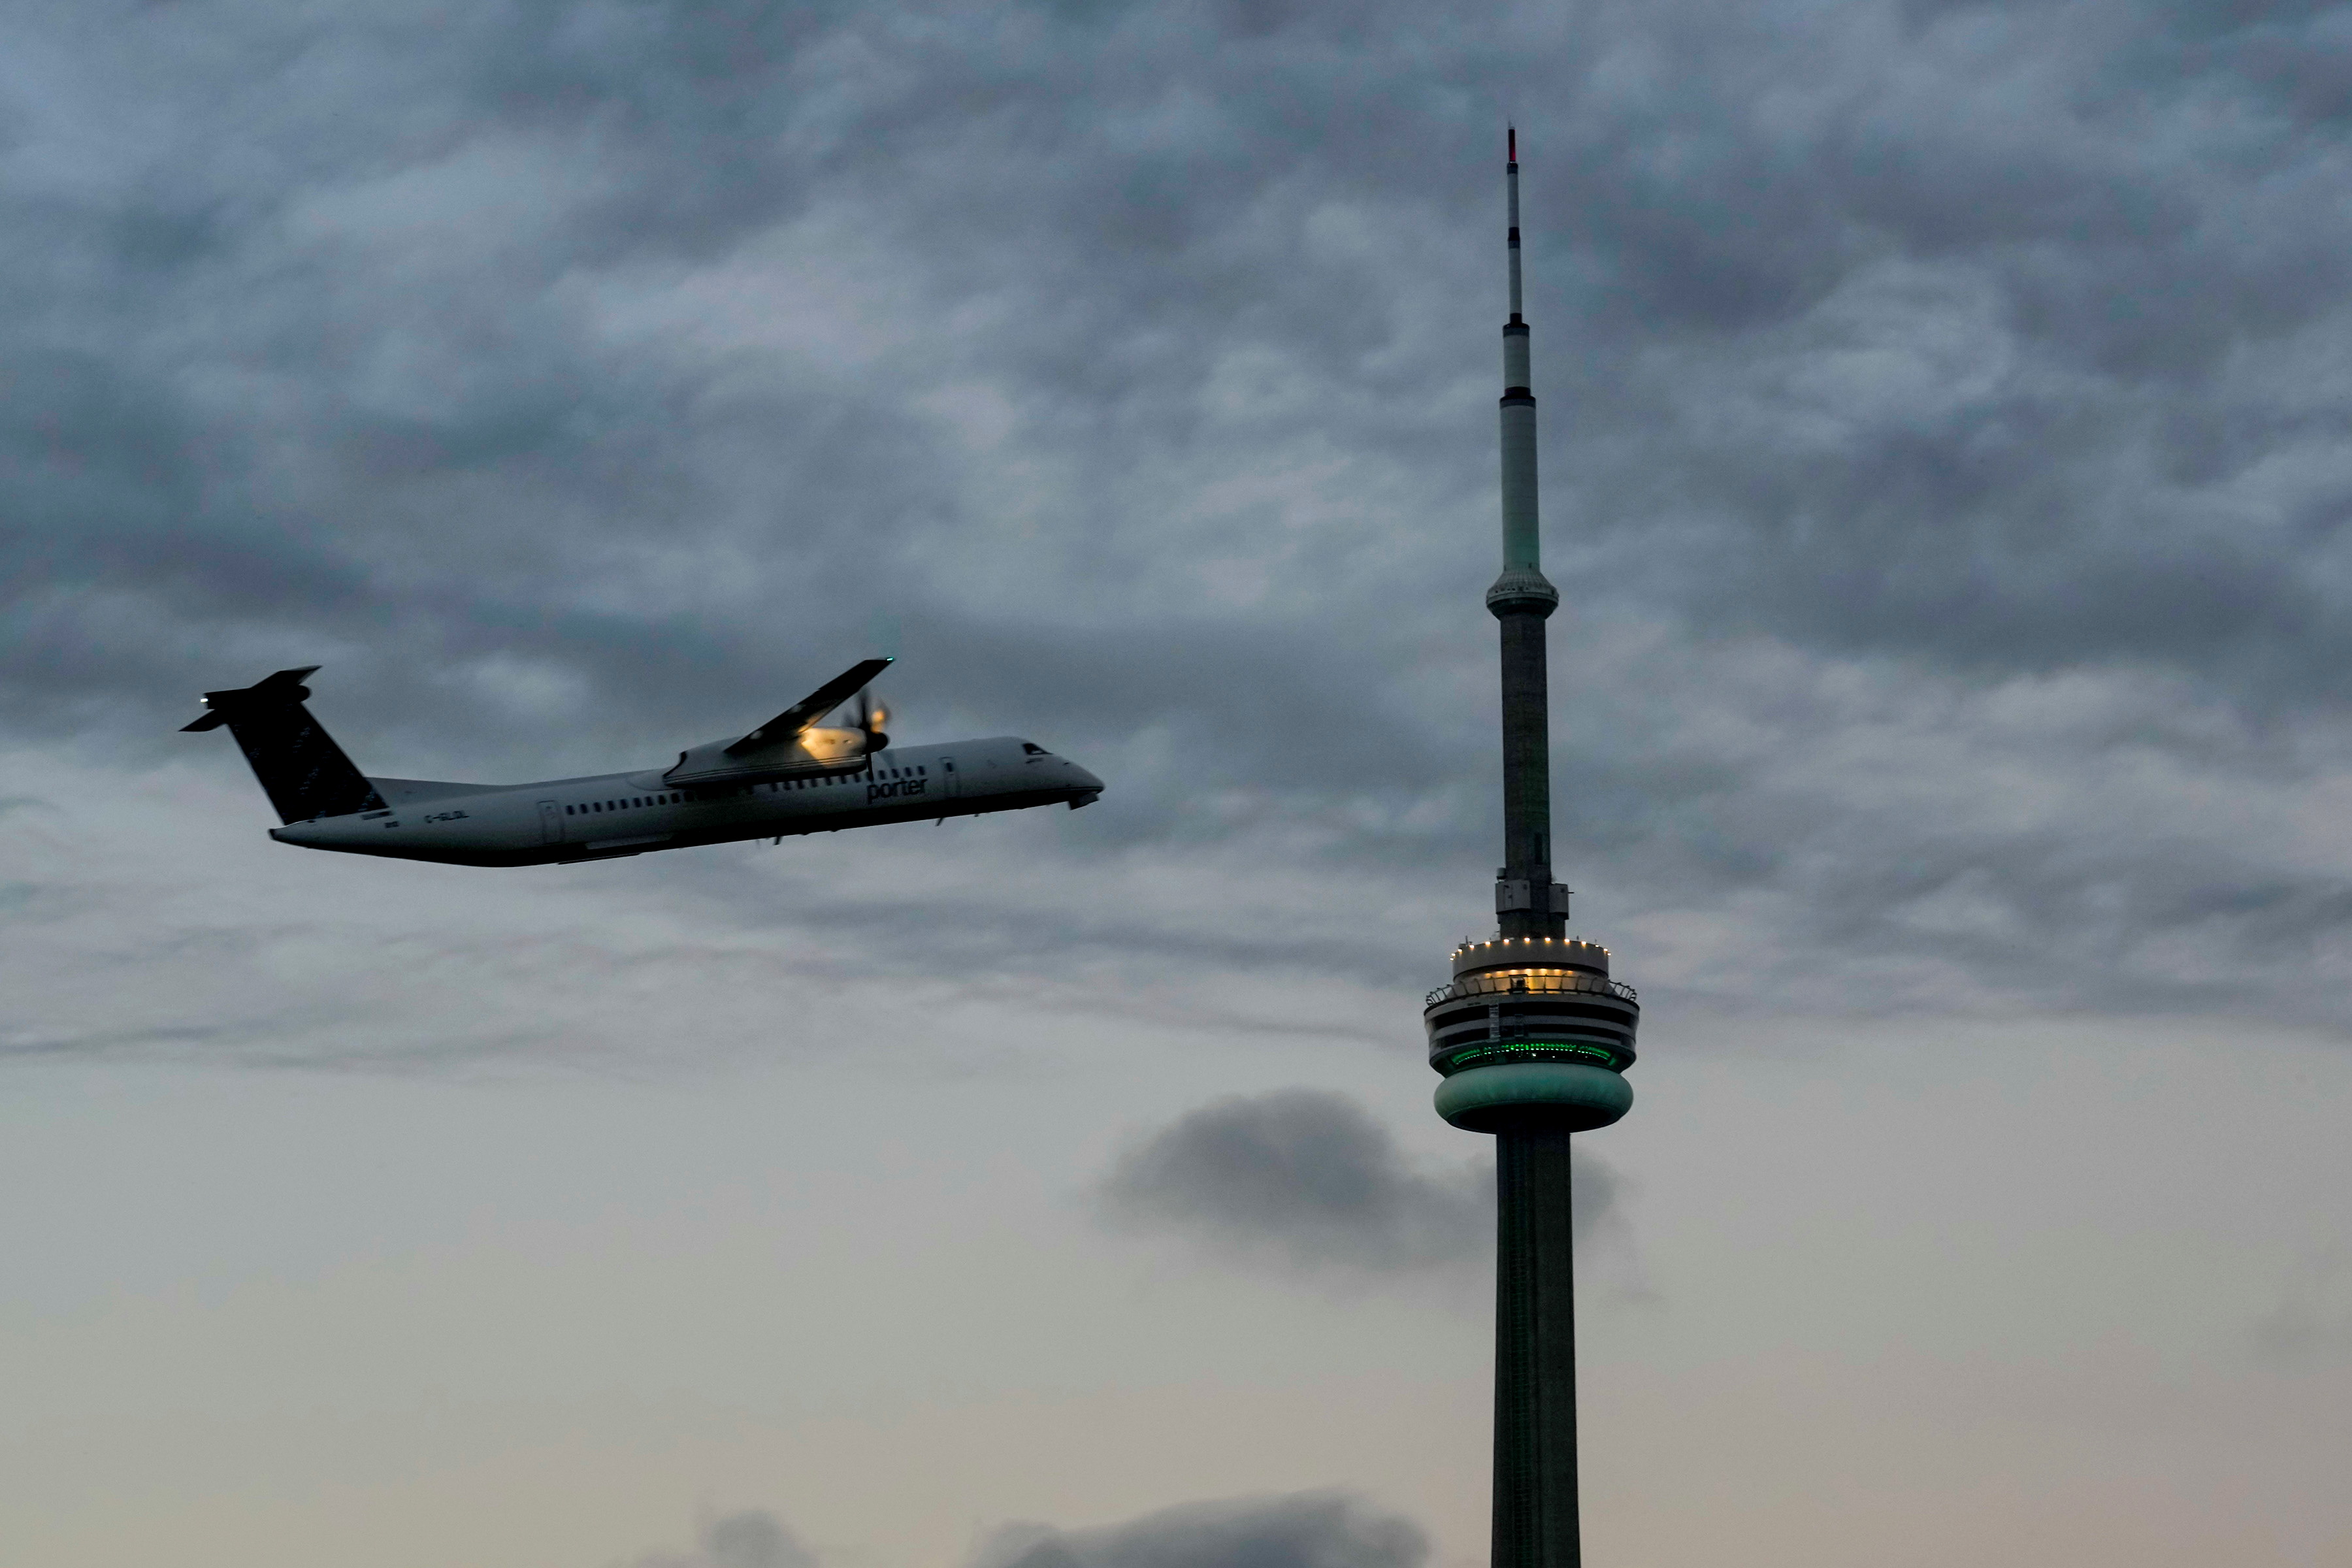 An airplane takes off from Billy Bishop Airport in Toronto